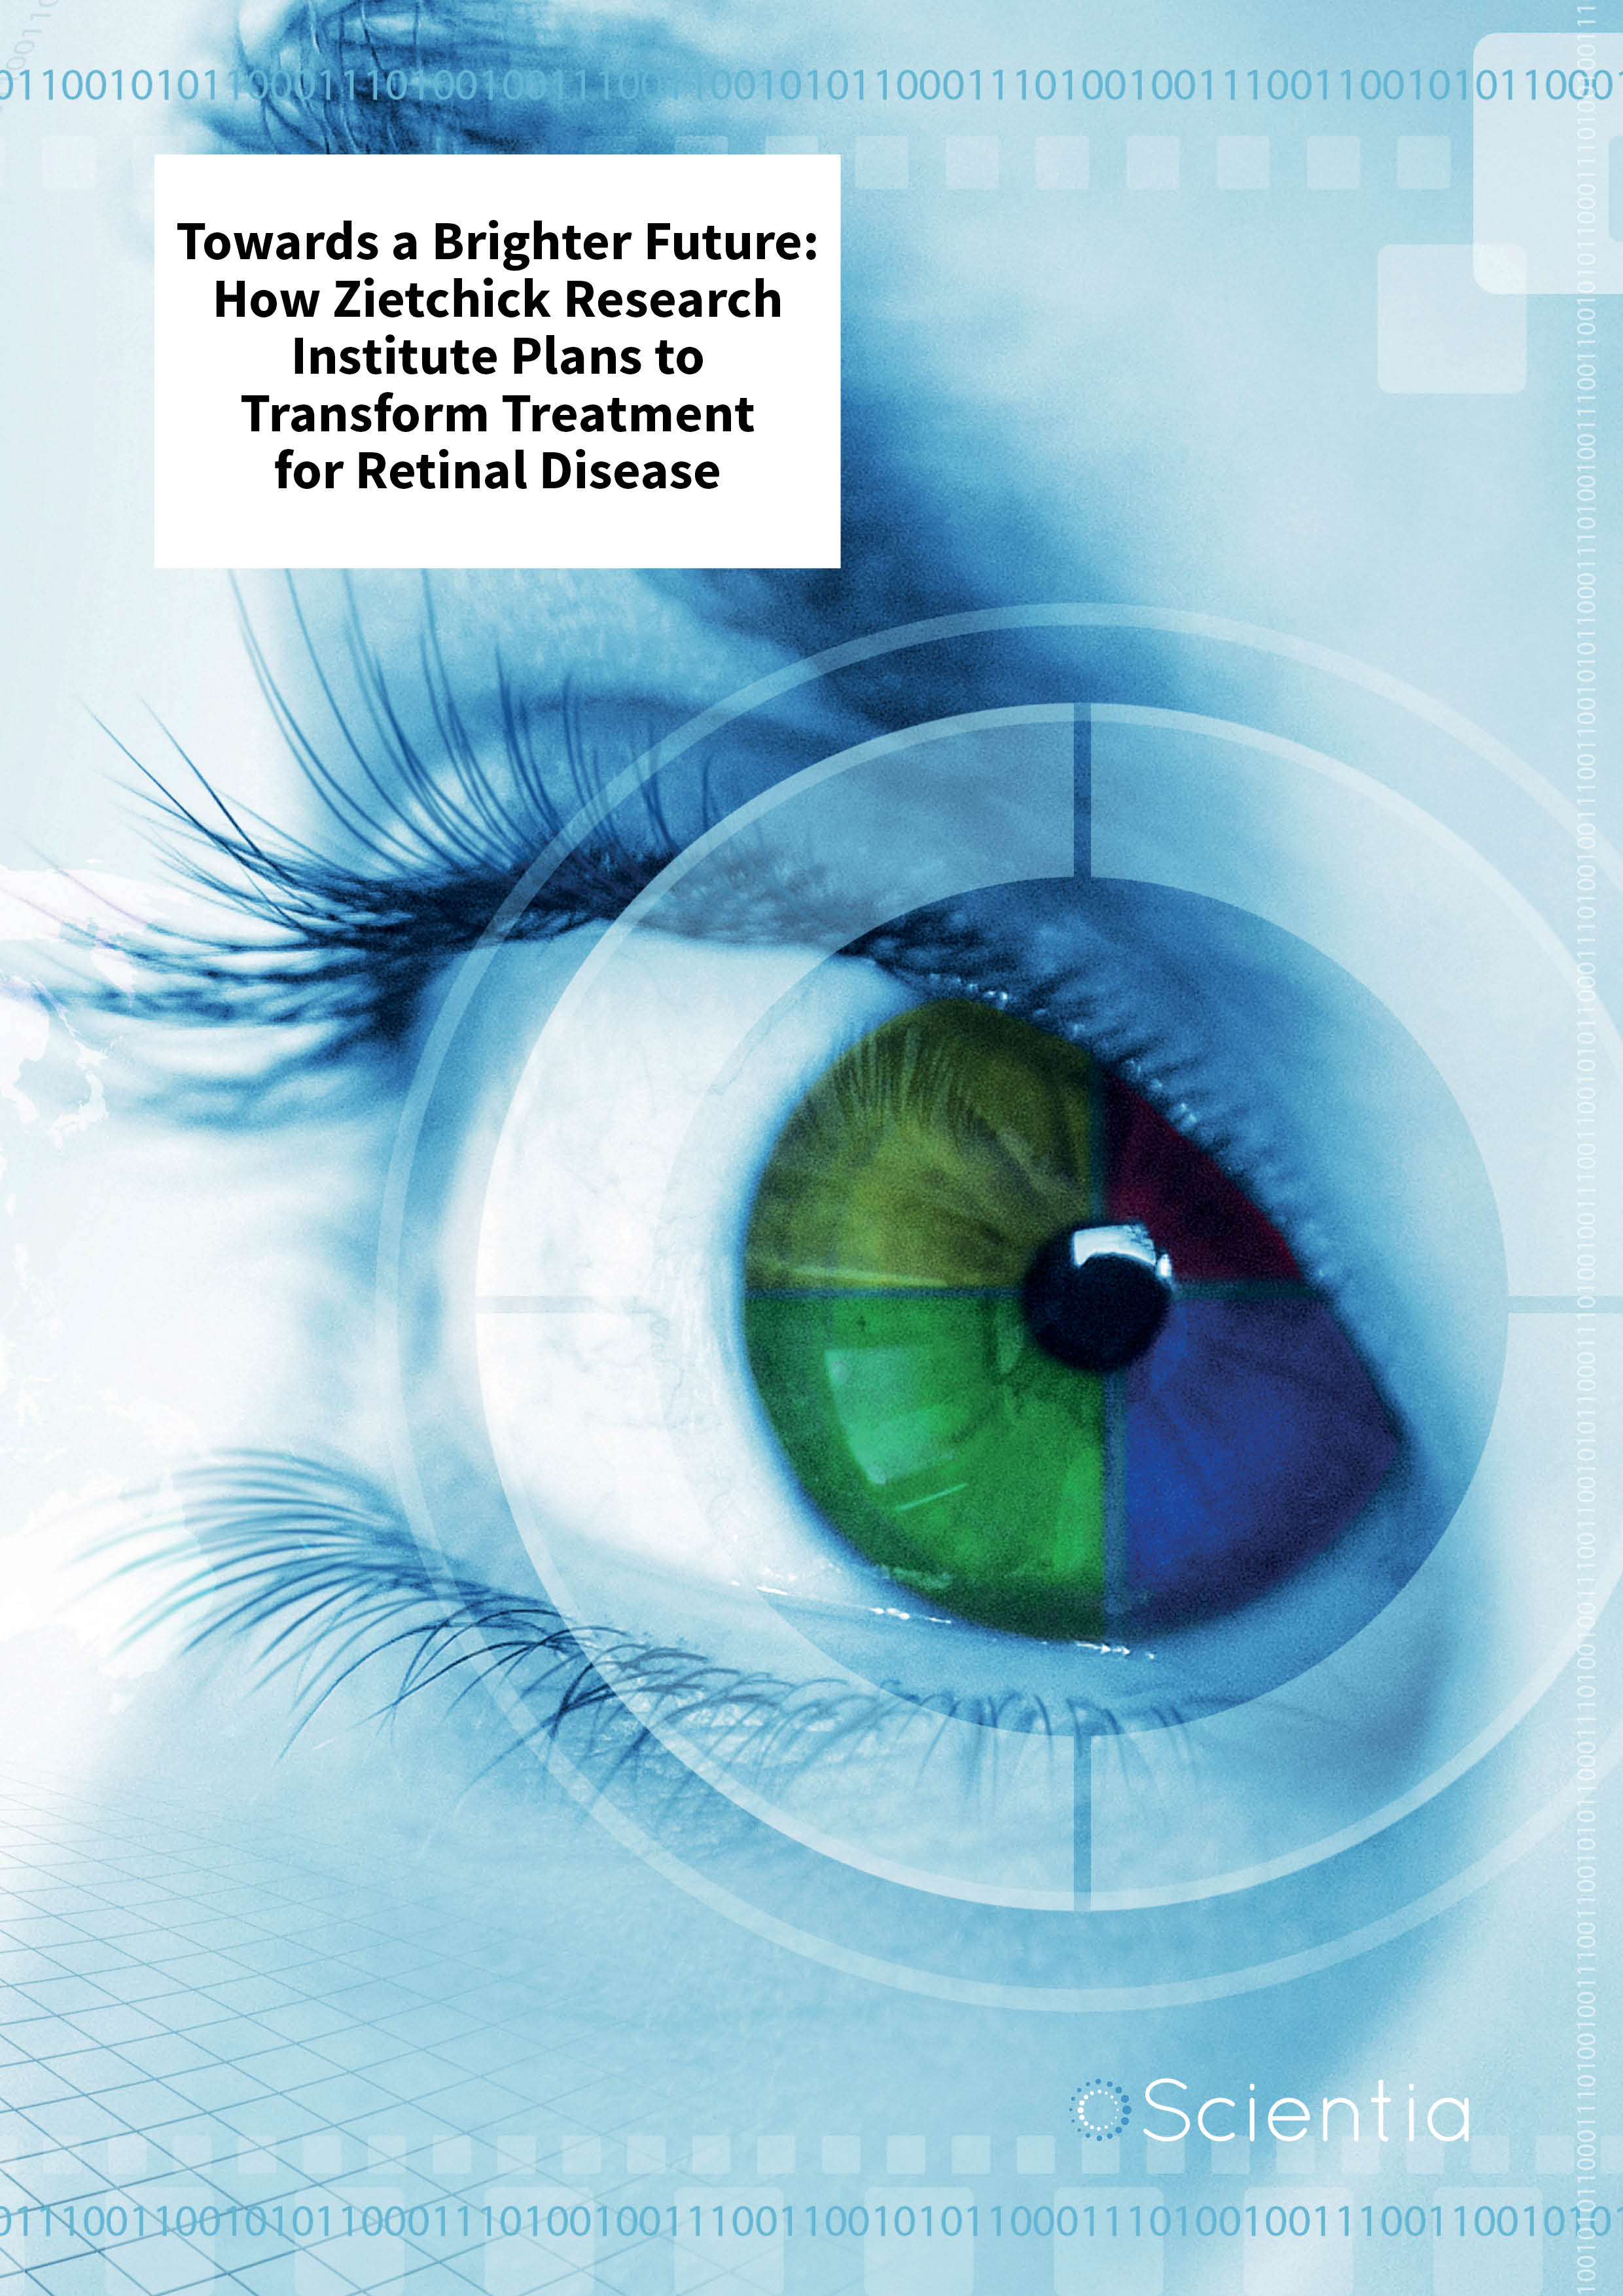 Dr Tammy Movsas, MD, MPH – Towards a Brighter Future: How Zietchick Research Institute Plans to Transform Treatment for Retinal Disease